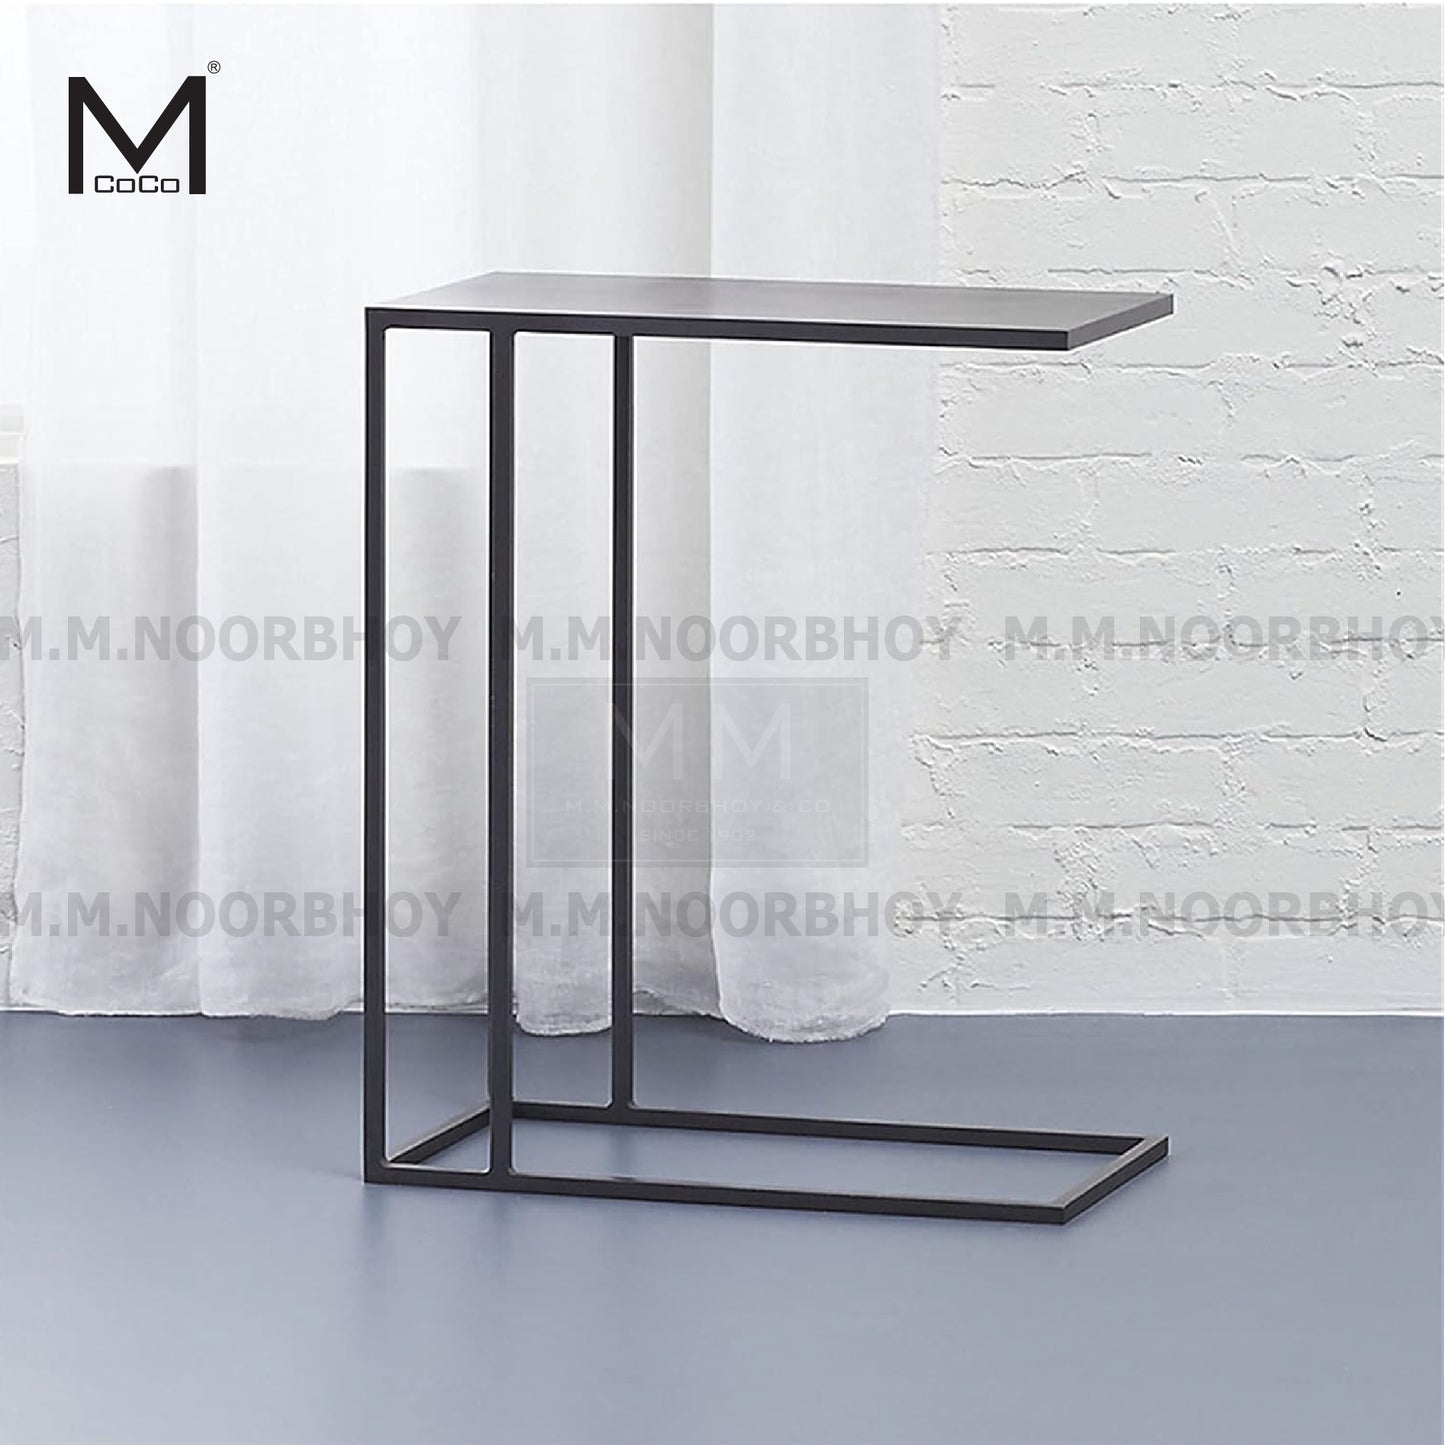 Mcoco Steel Narrow Multipurpose Side Table Black Color (48X28X58CM) - YI-DS005